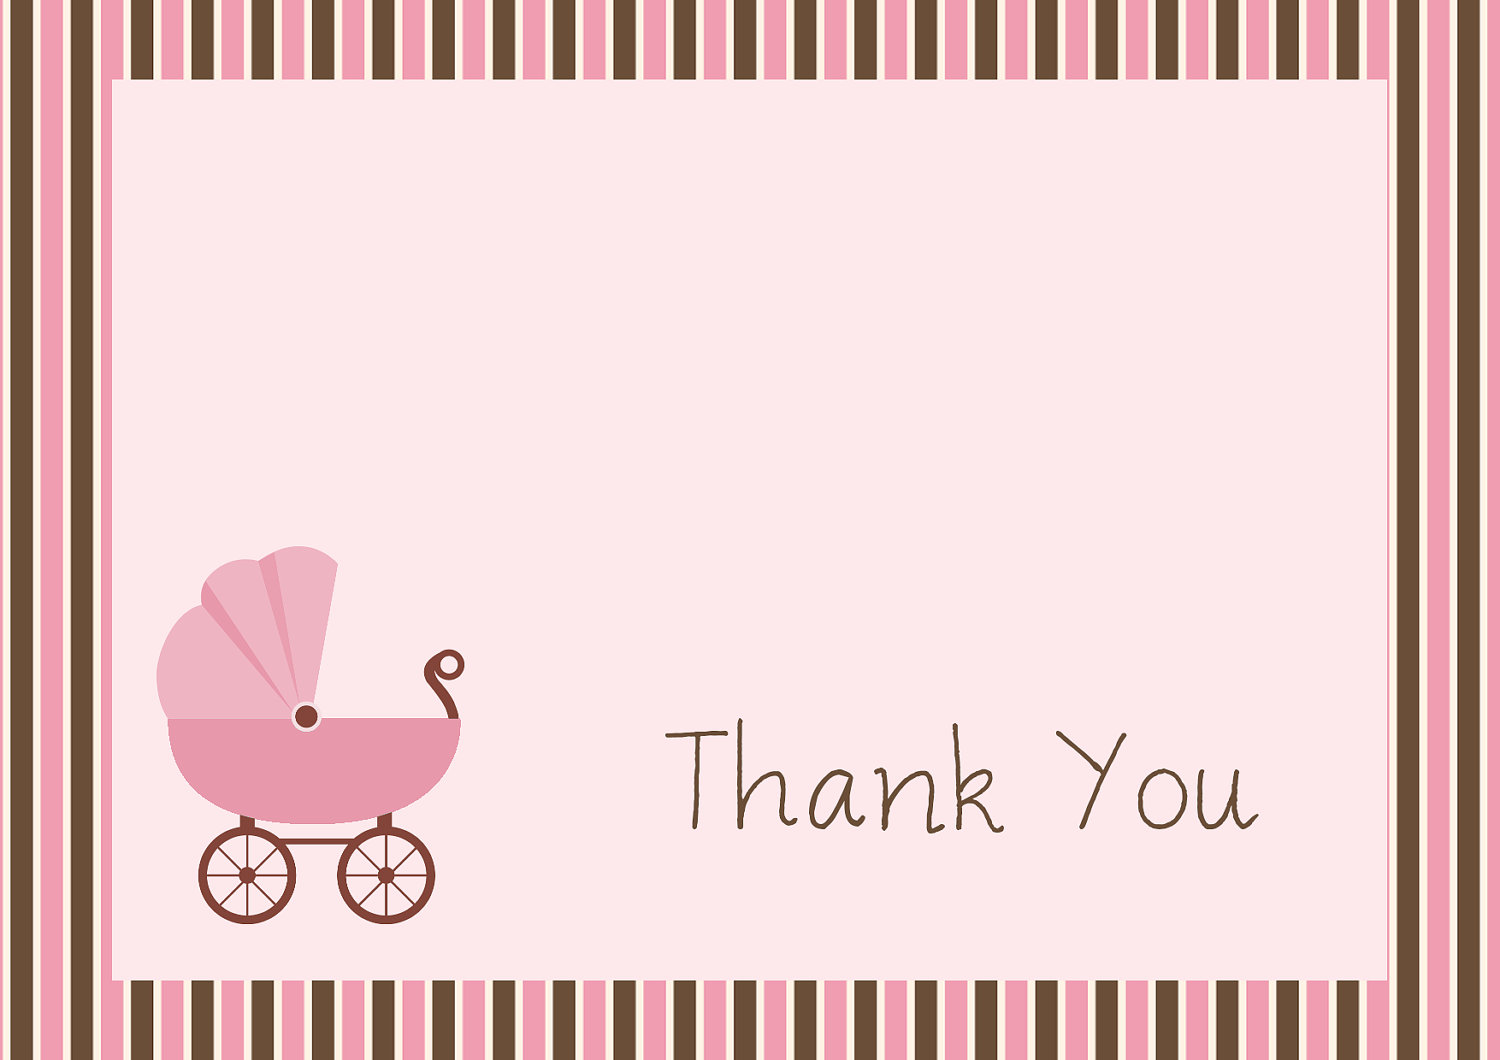 Thank You Cards For A Baby Shower Pink Bumble Bee Thank You Cards 